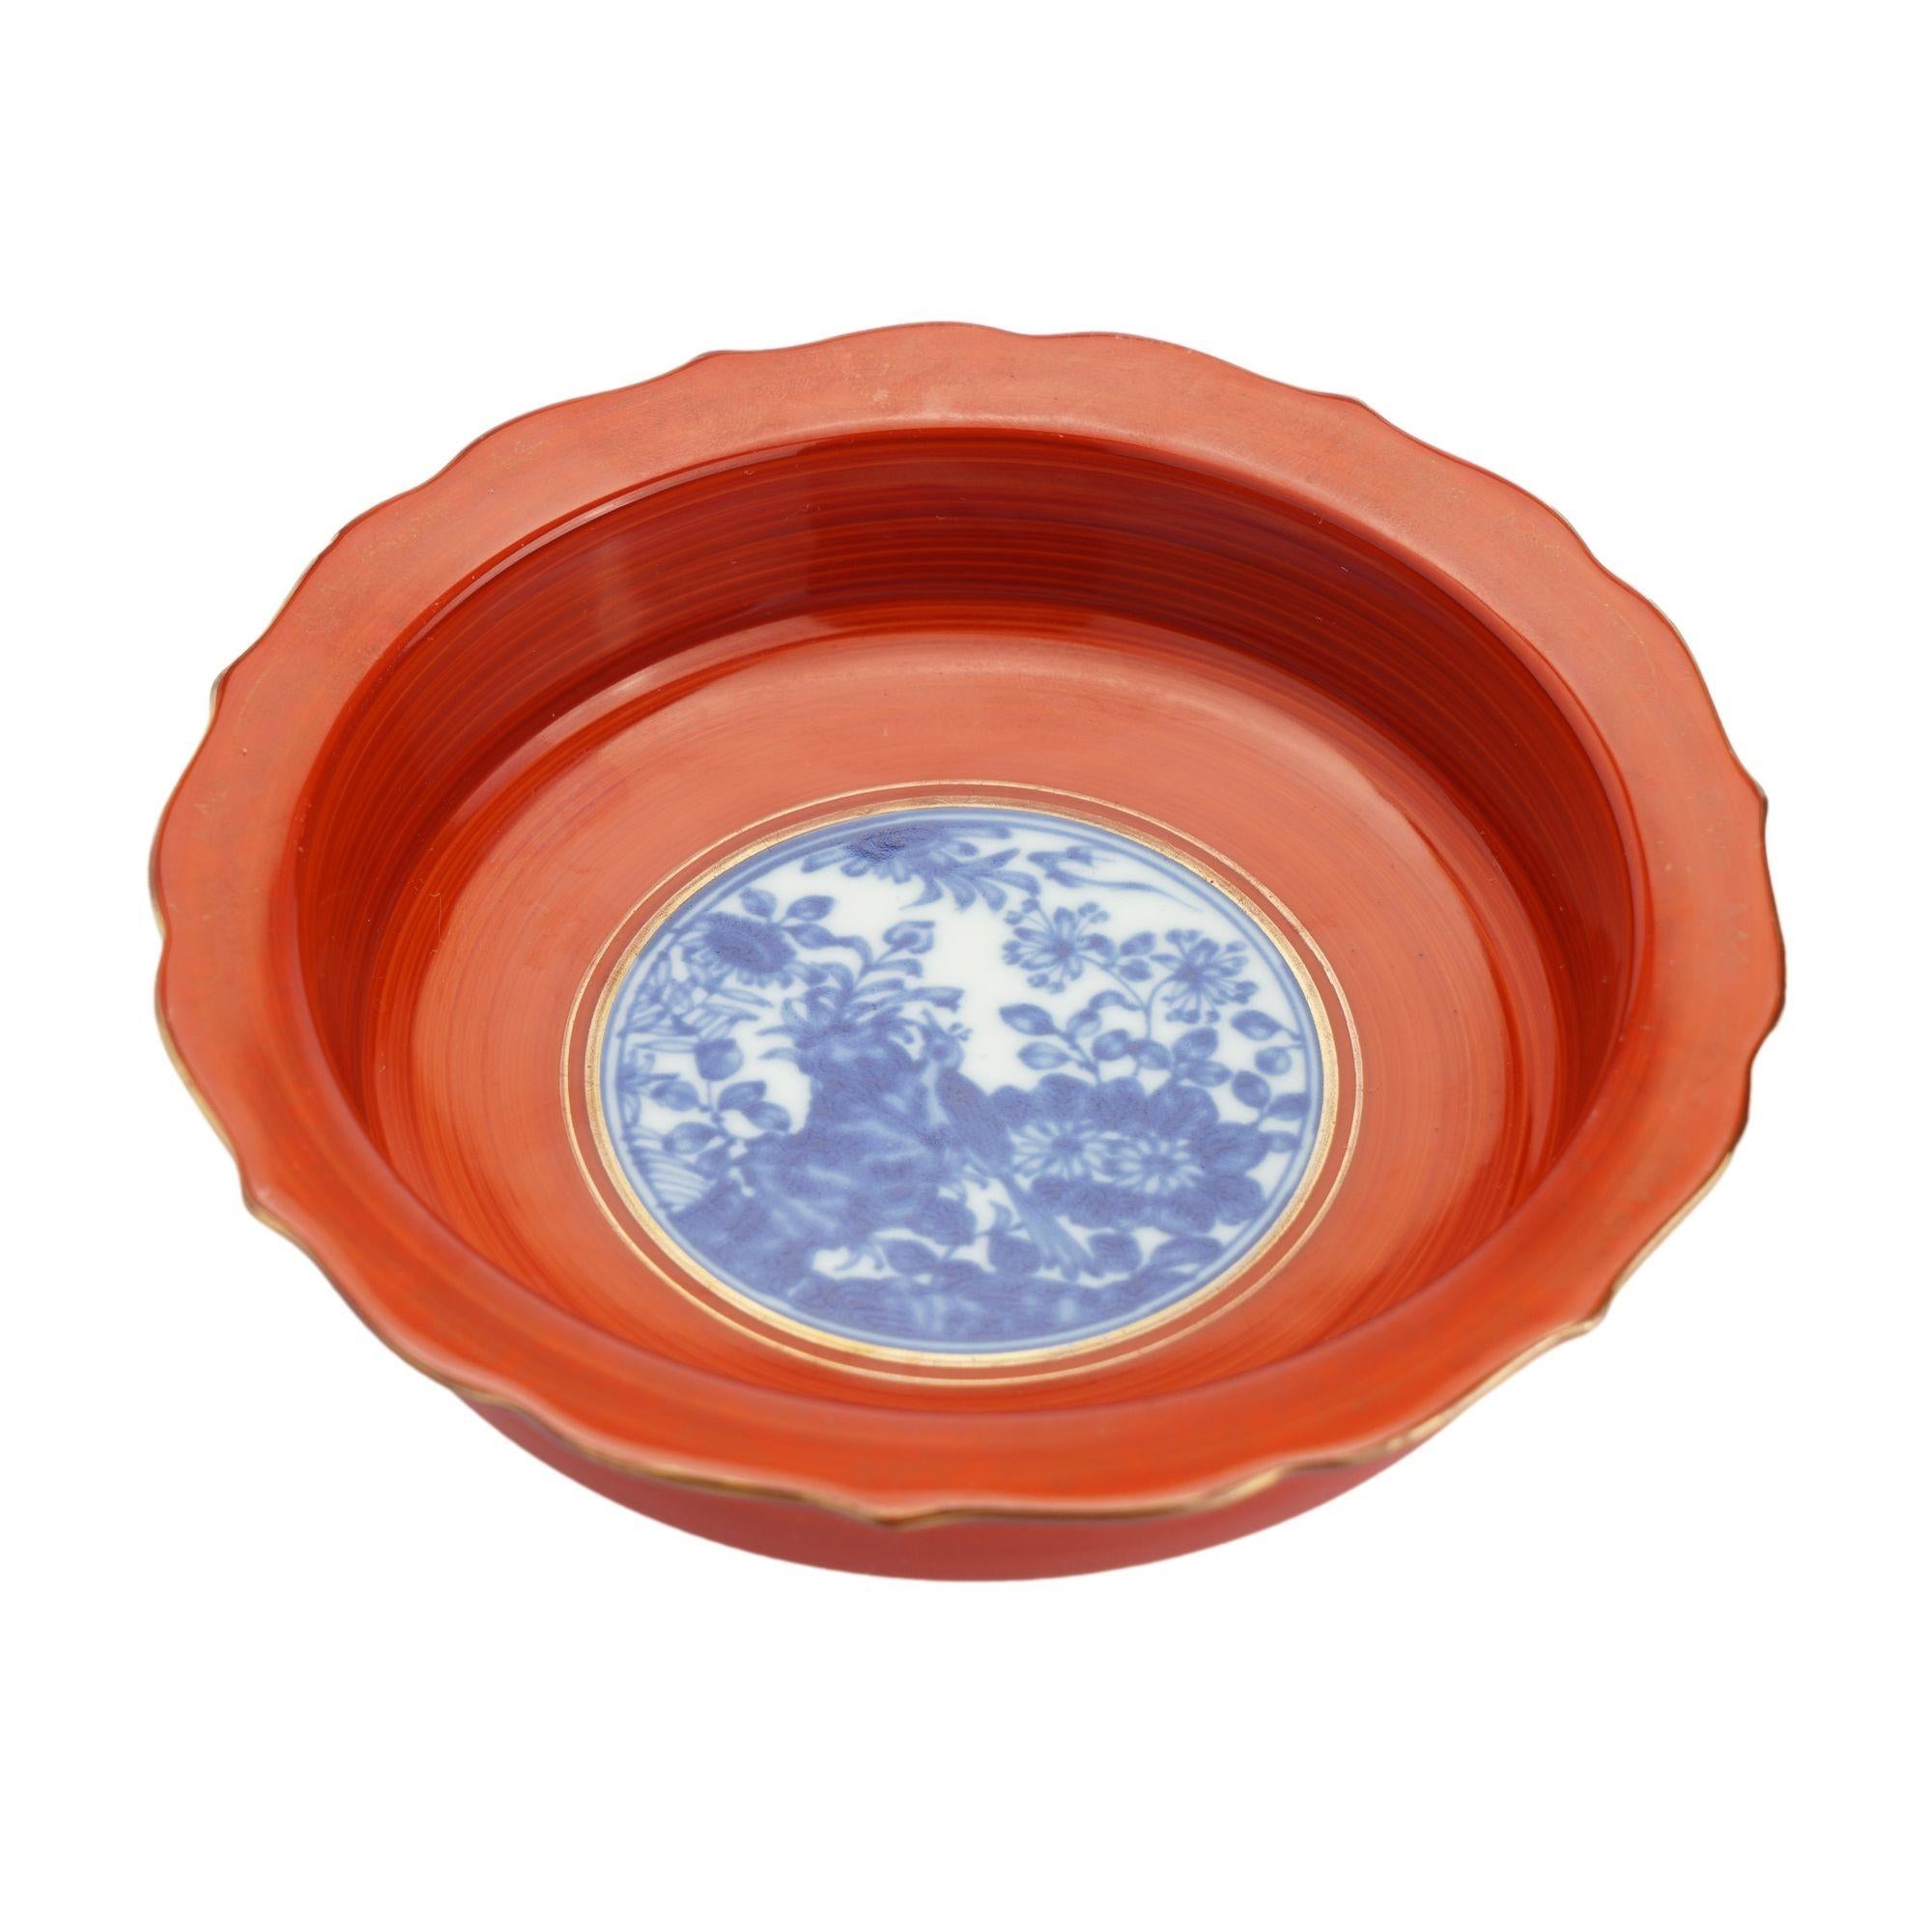 Japanese coral red enameled porcelain bottle coaster, with standing edge and flaring scolloped rim, centering on a circular idealized landscape rendered in cobalt under glaze blue. Japanese chop in cobalt under glaze blue on the underfoot. 
Japan,